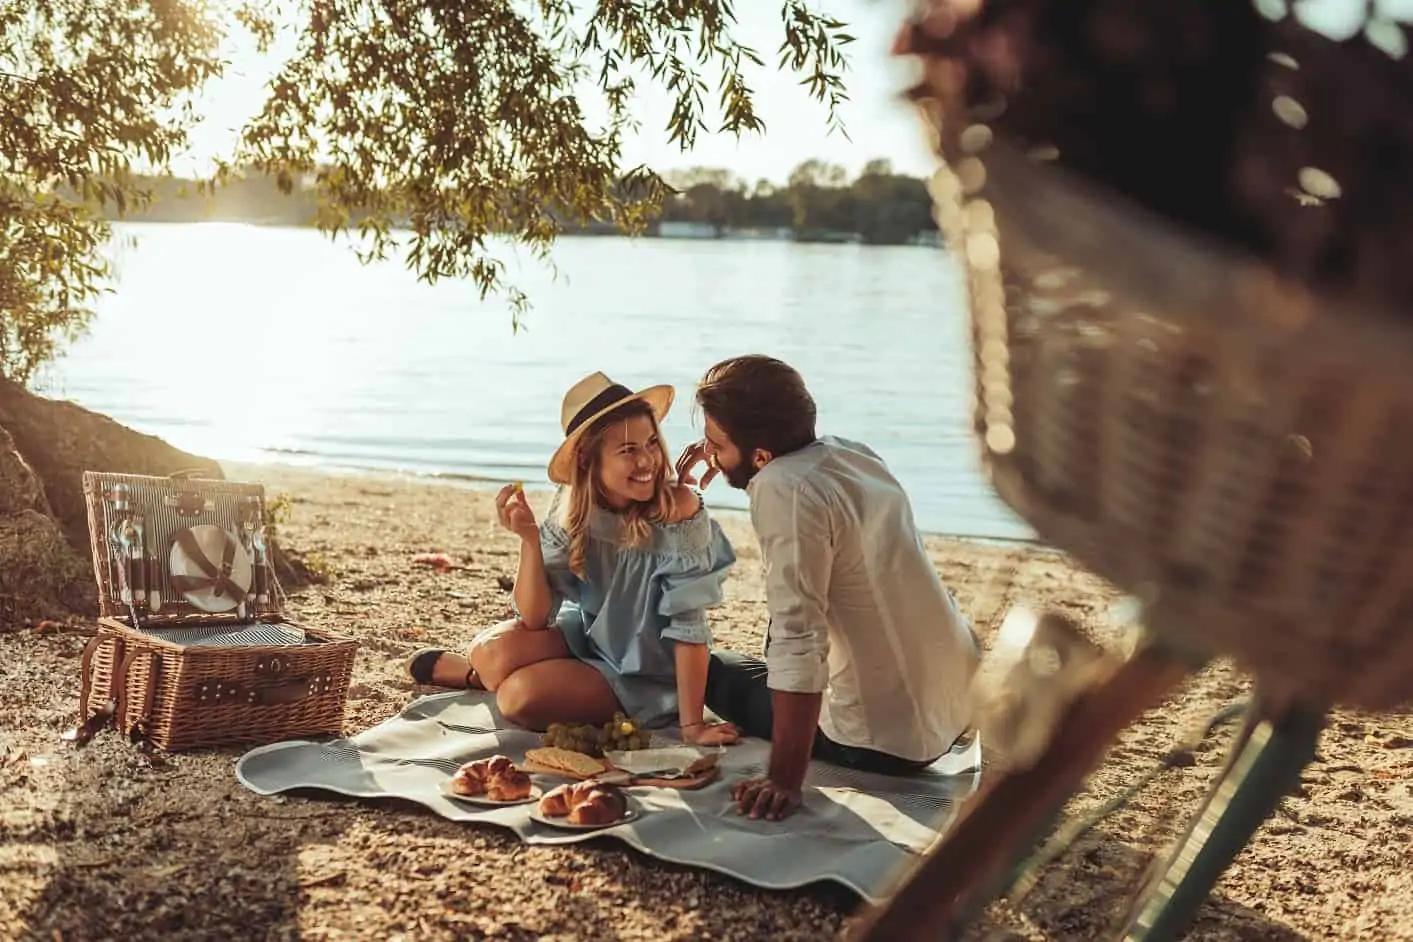 Romantic beach picnic with a luxury picnic basket